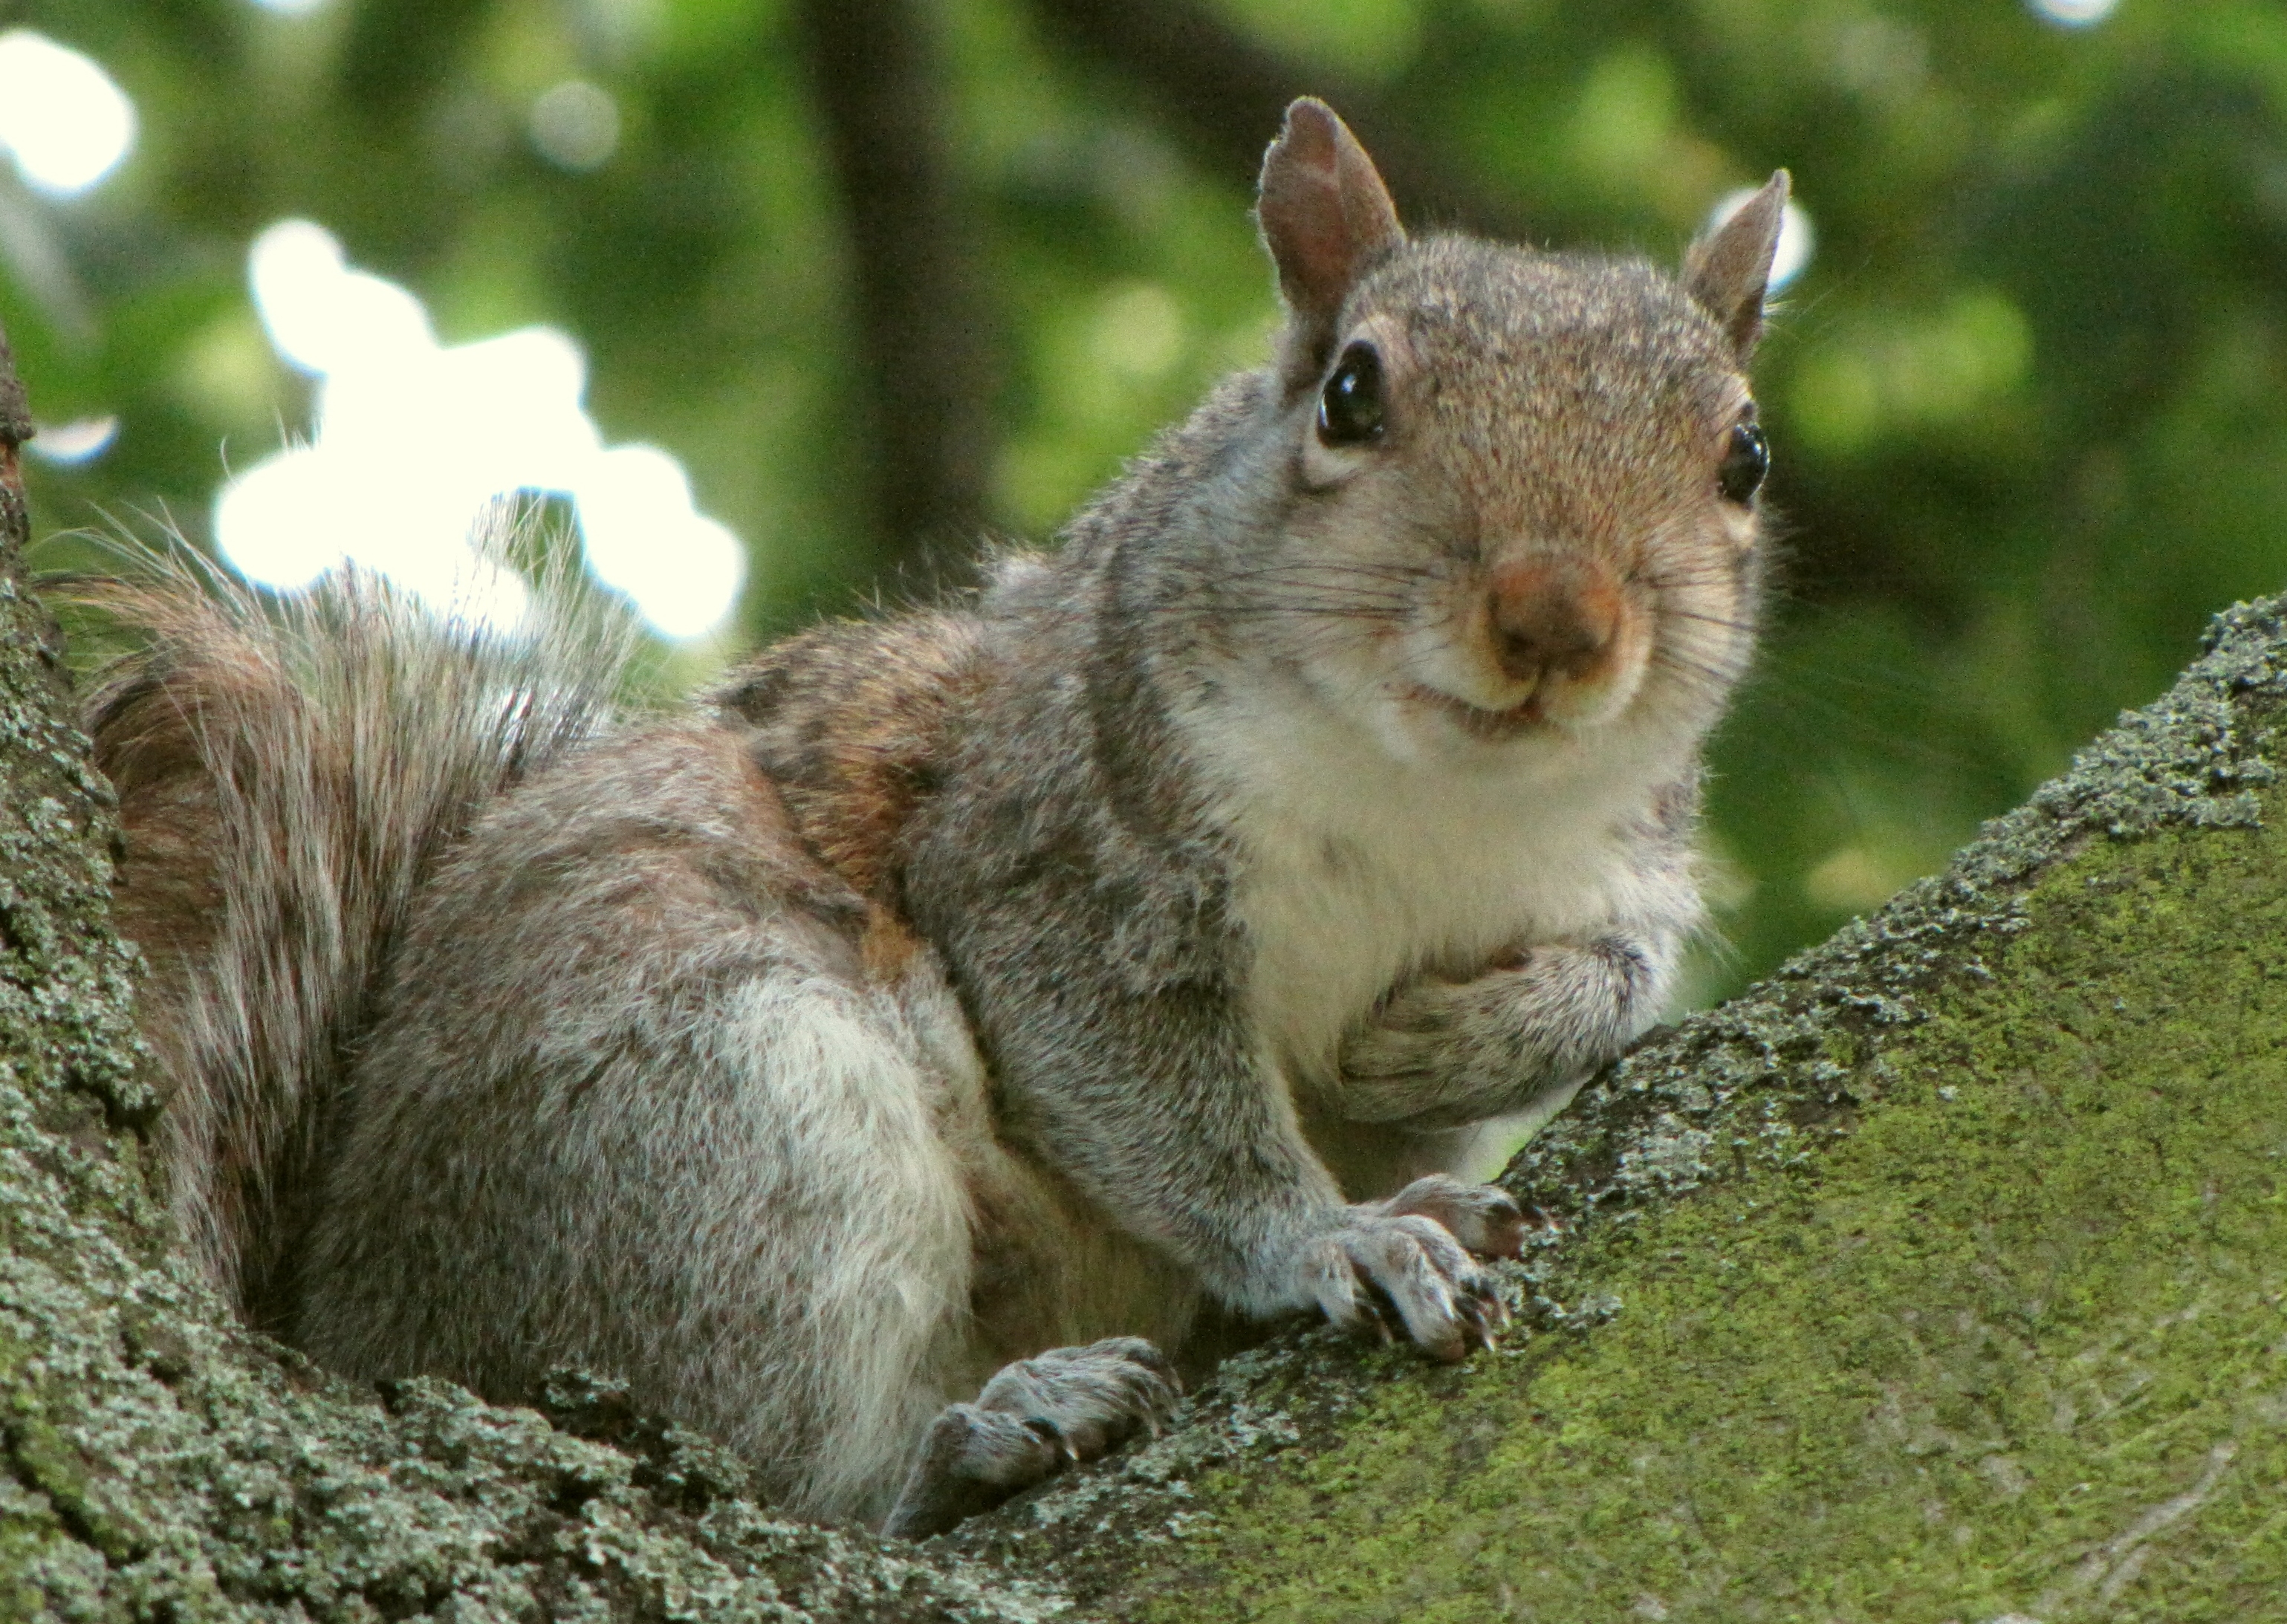 Squirrel with a stash of acorns